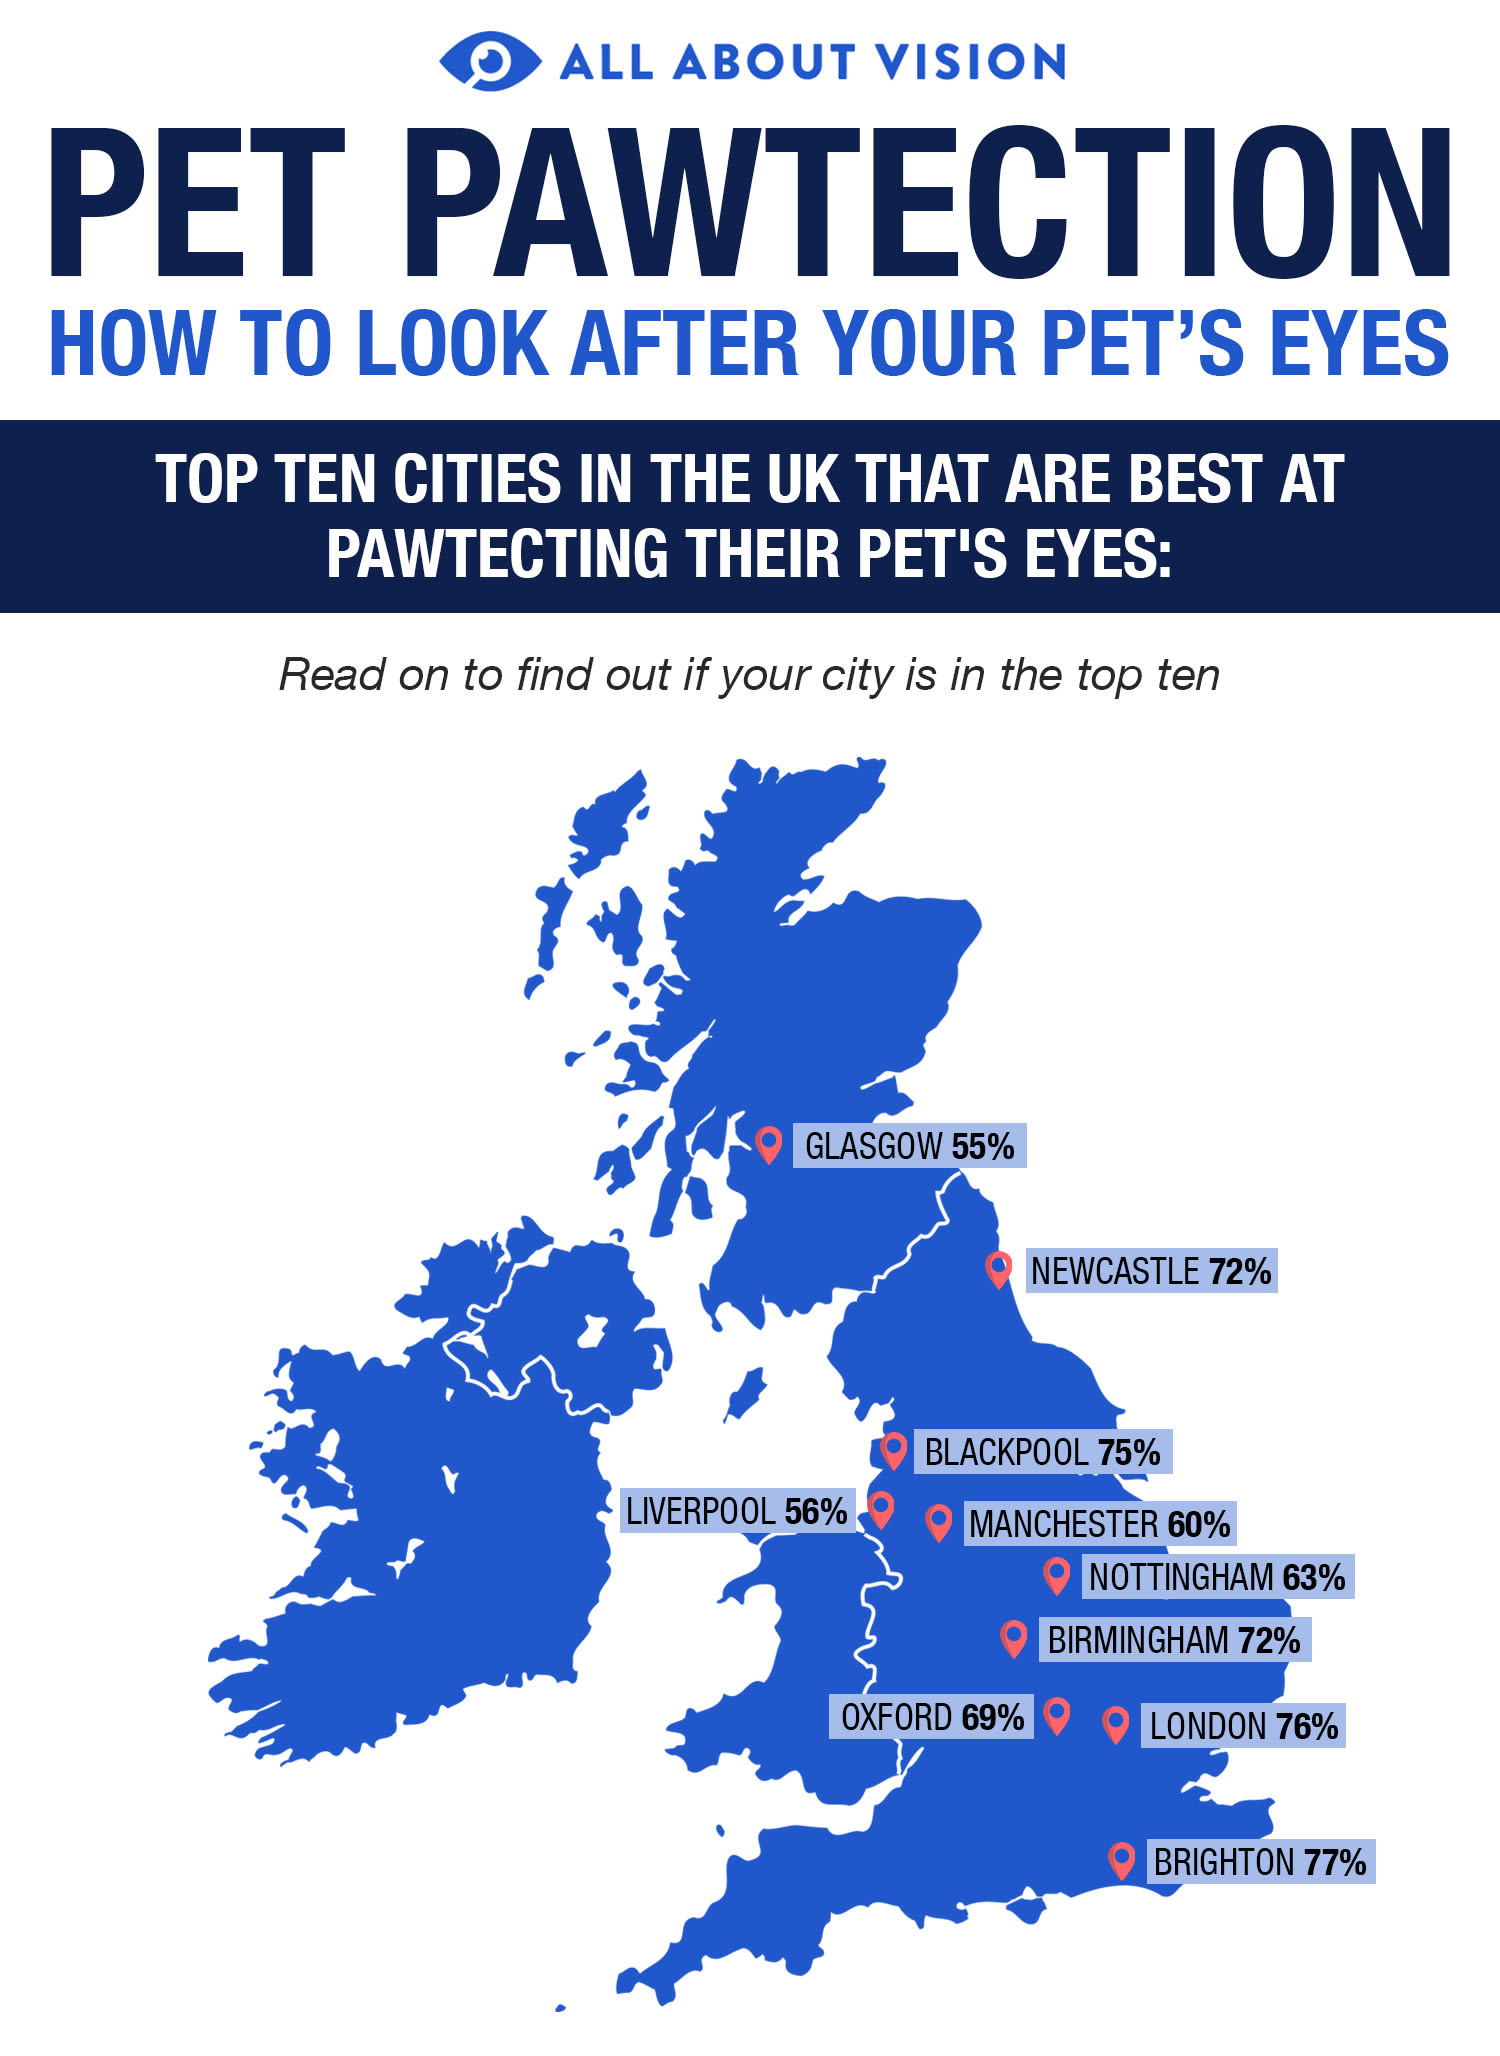 https://cdn.allaboutvision.com/pawtection-geographic-infographic-1500x2056.jpg